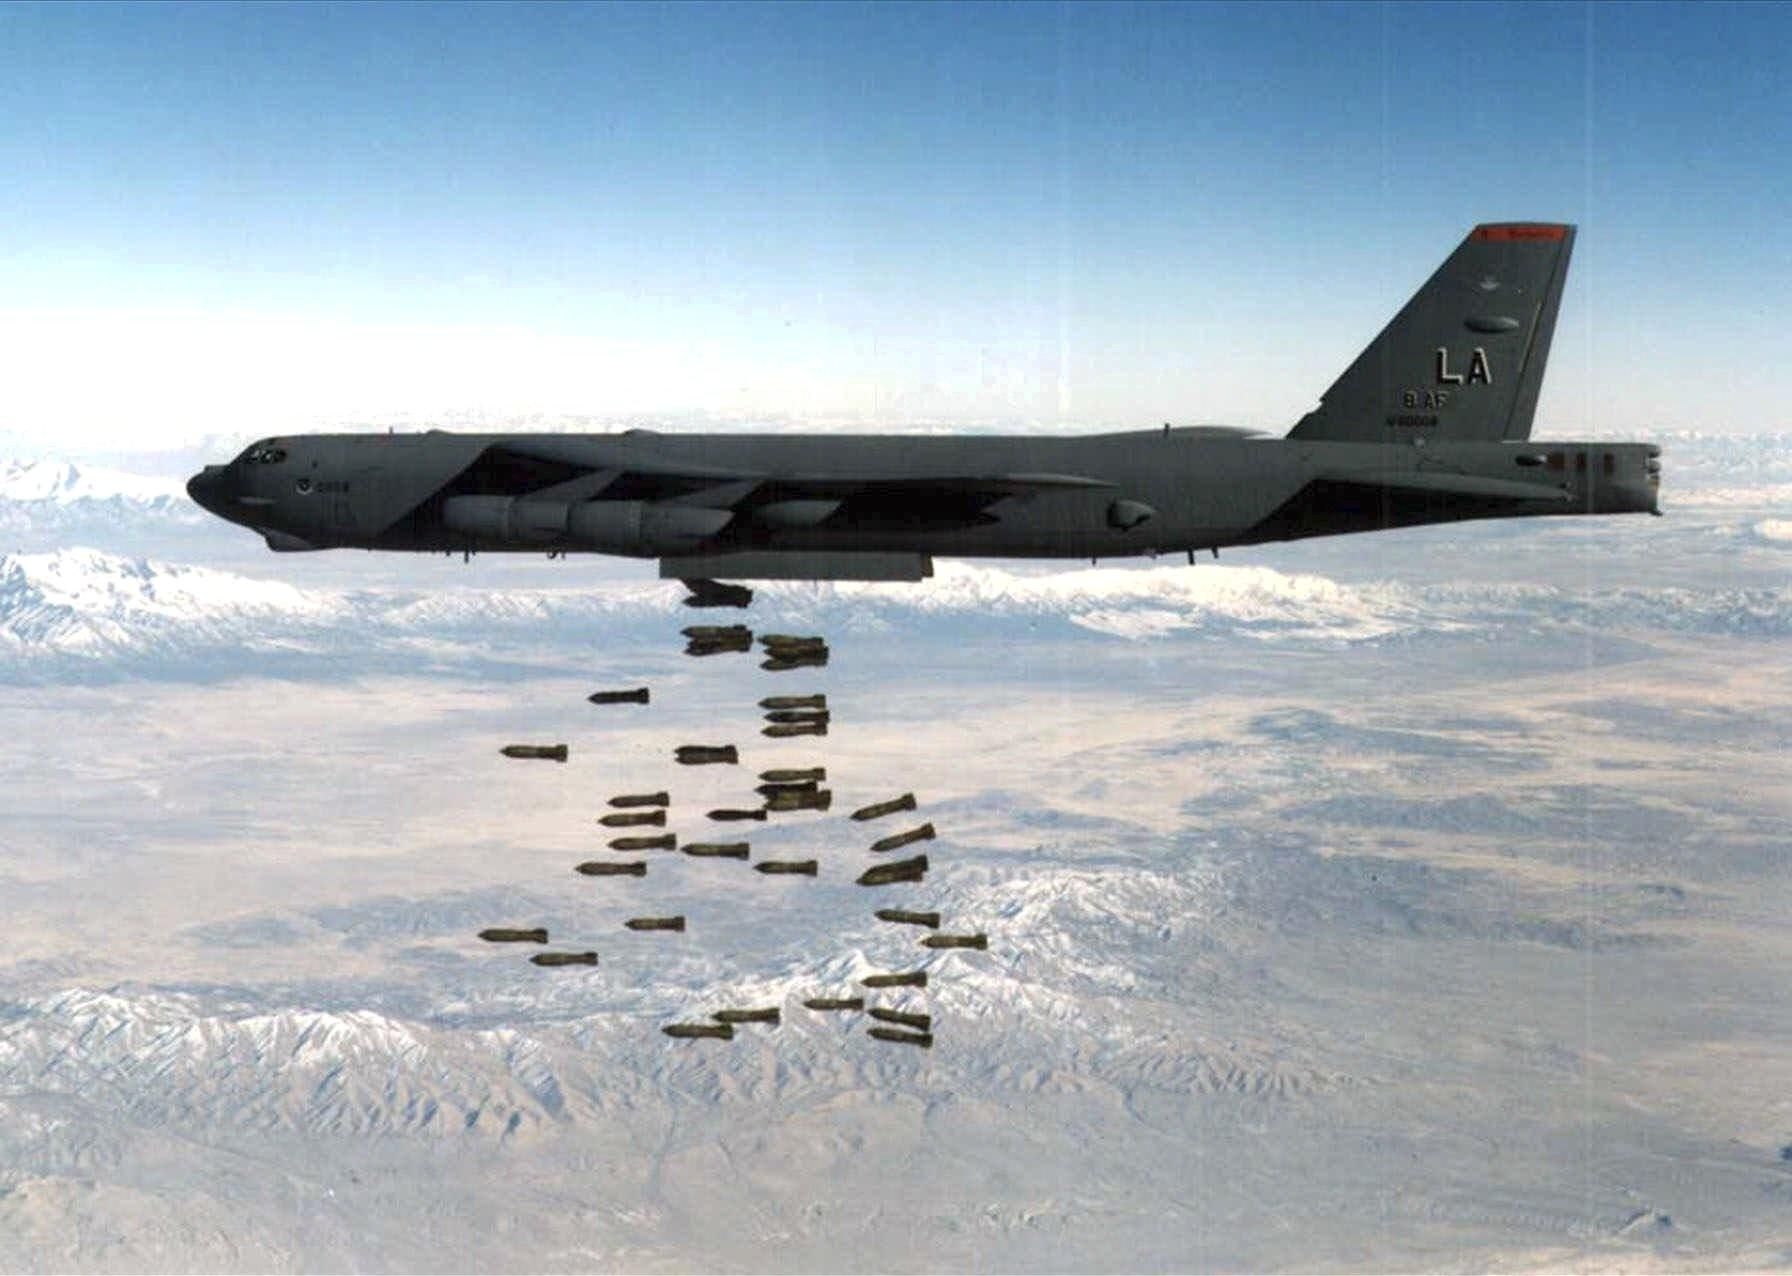 A B-52 drops bombs in this file photo, date unknown.